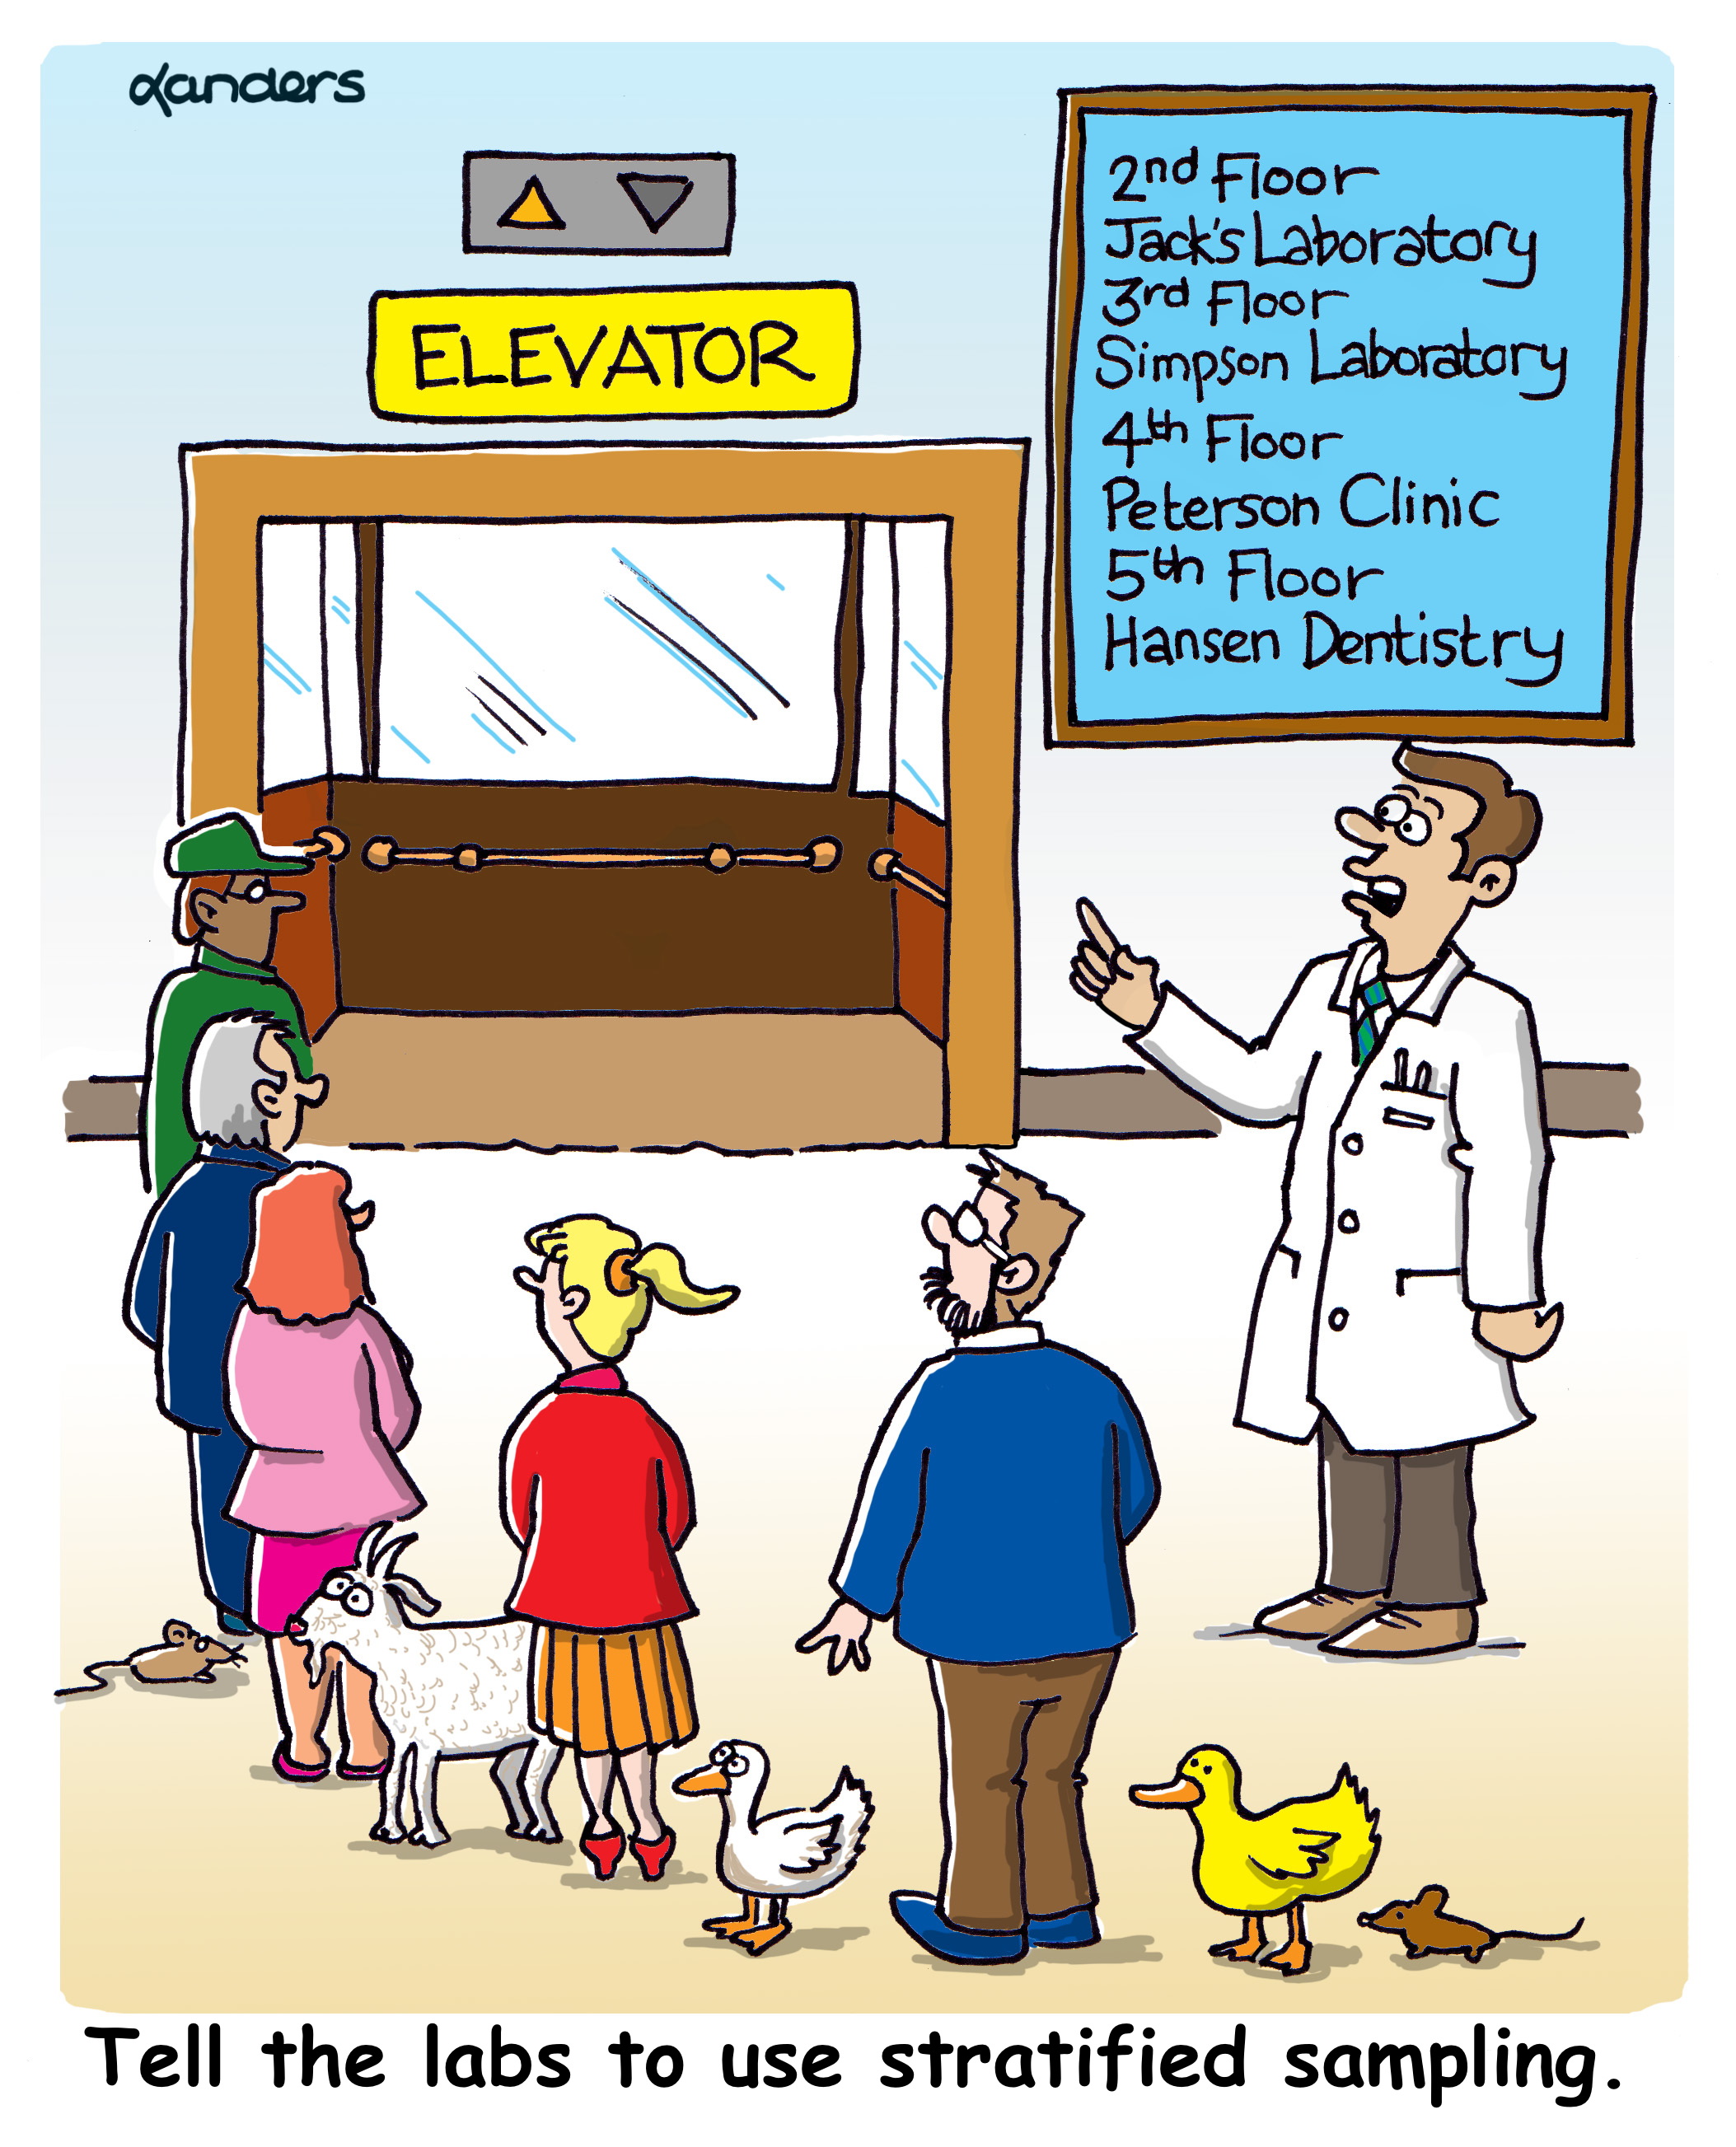 Cartoon showing people and various animals approaching an elevator